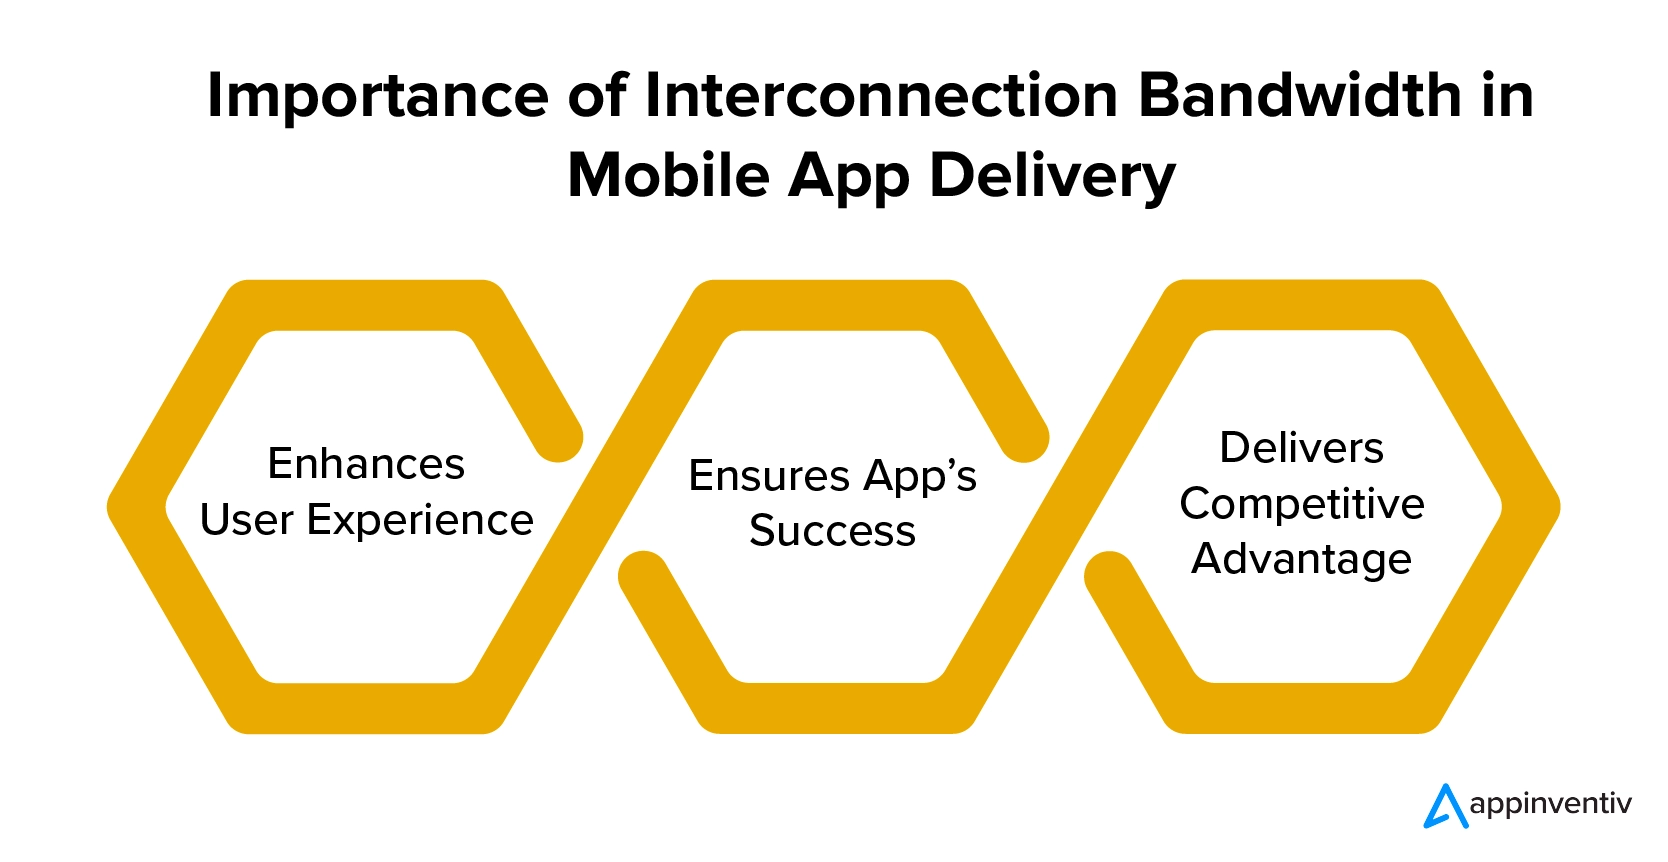 Importance of Interconnection Bandwidth in Mobile App Delivery